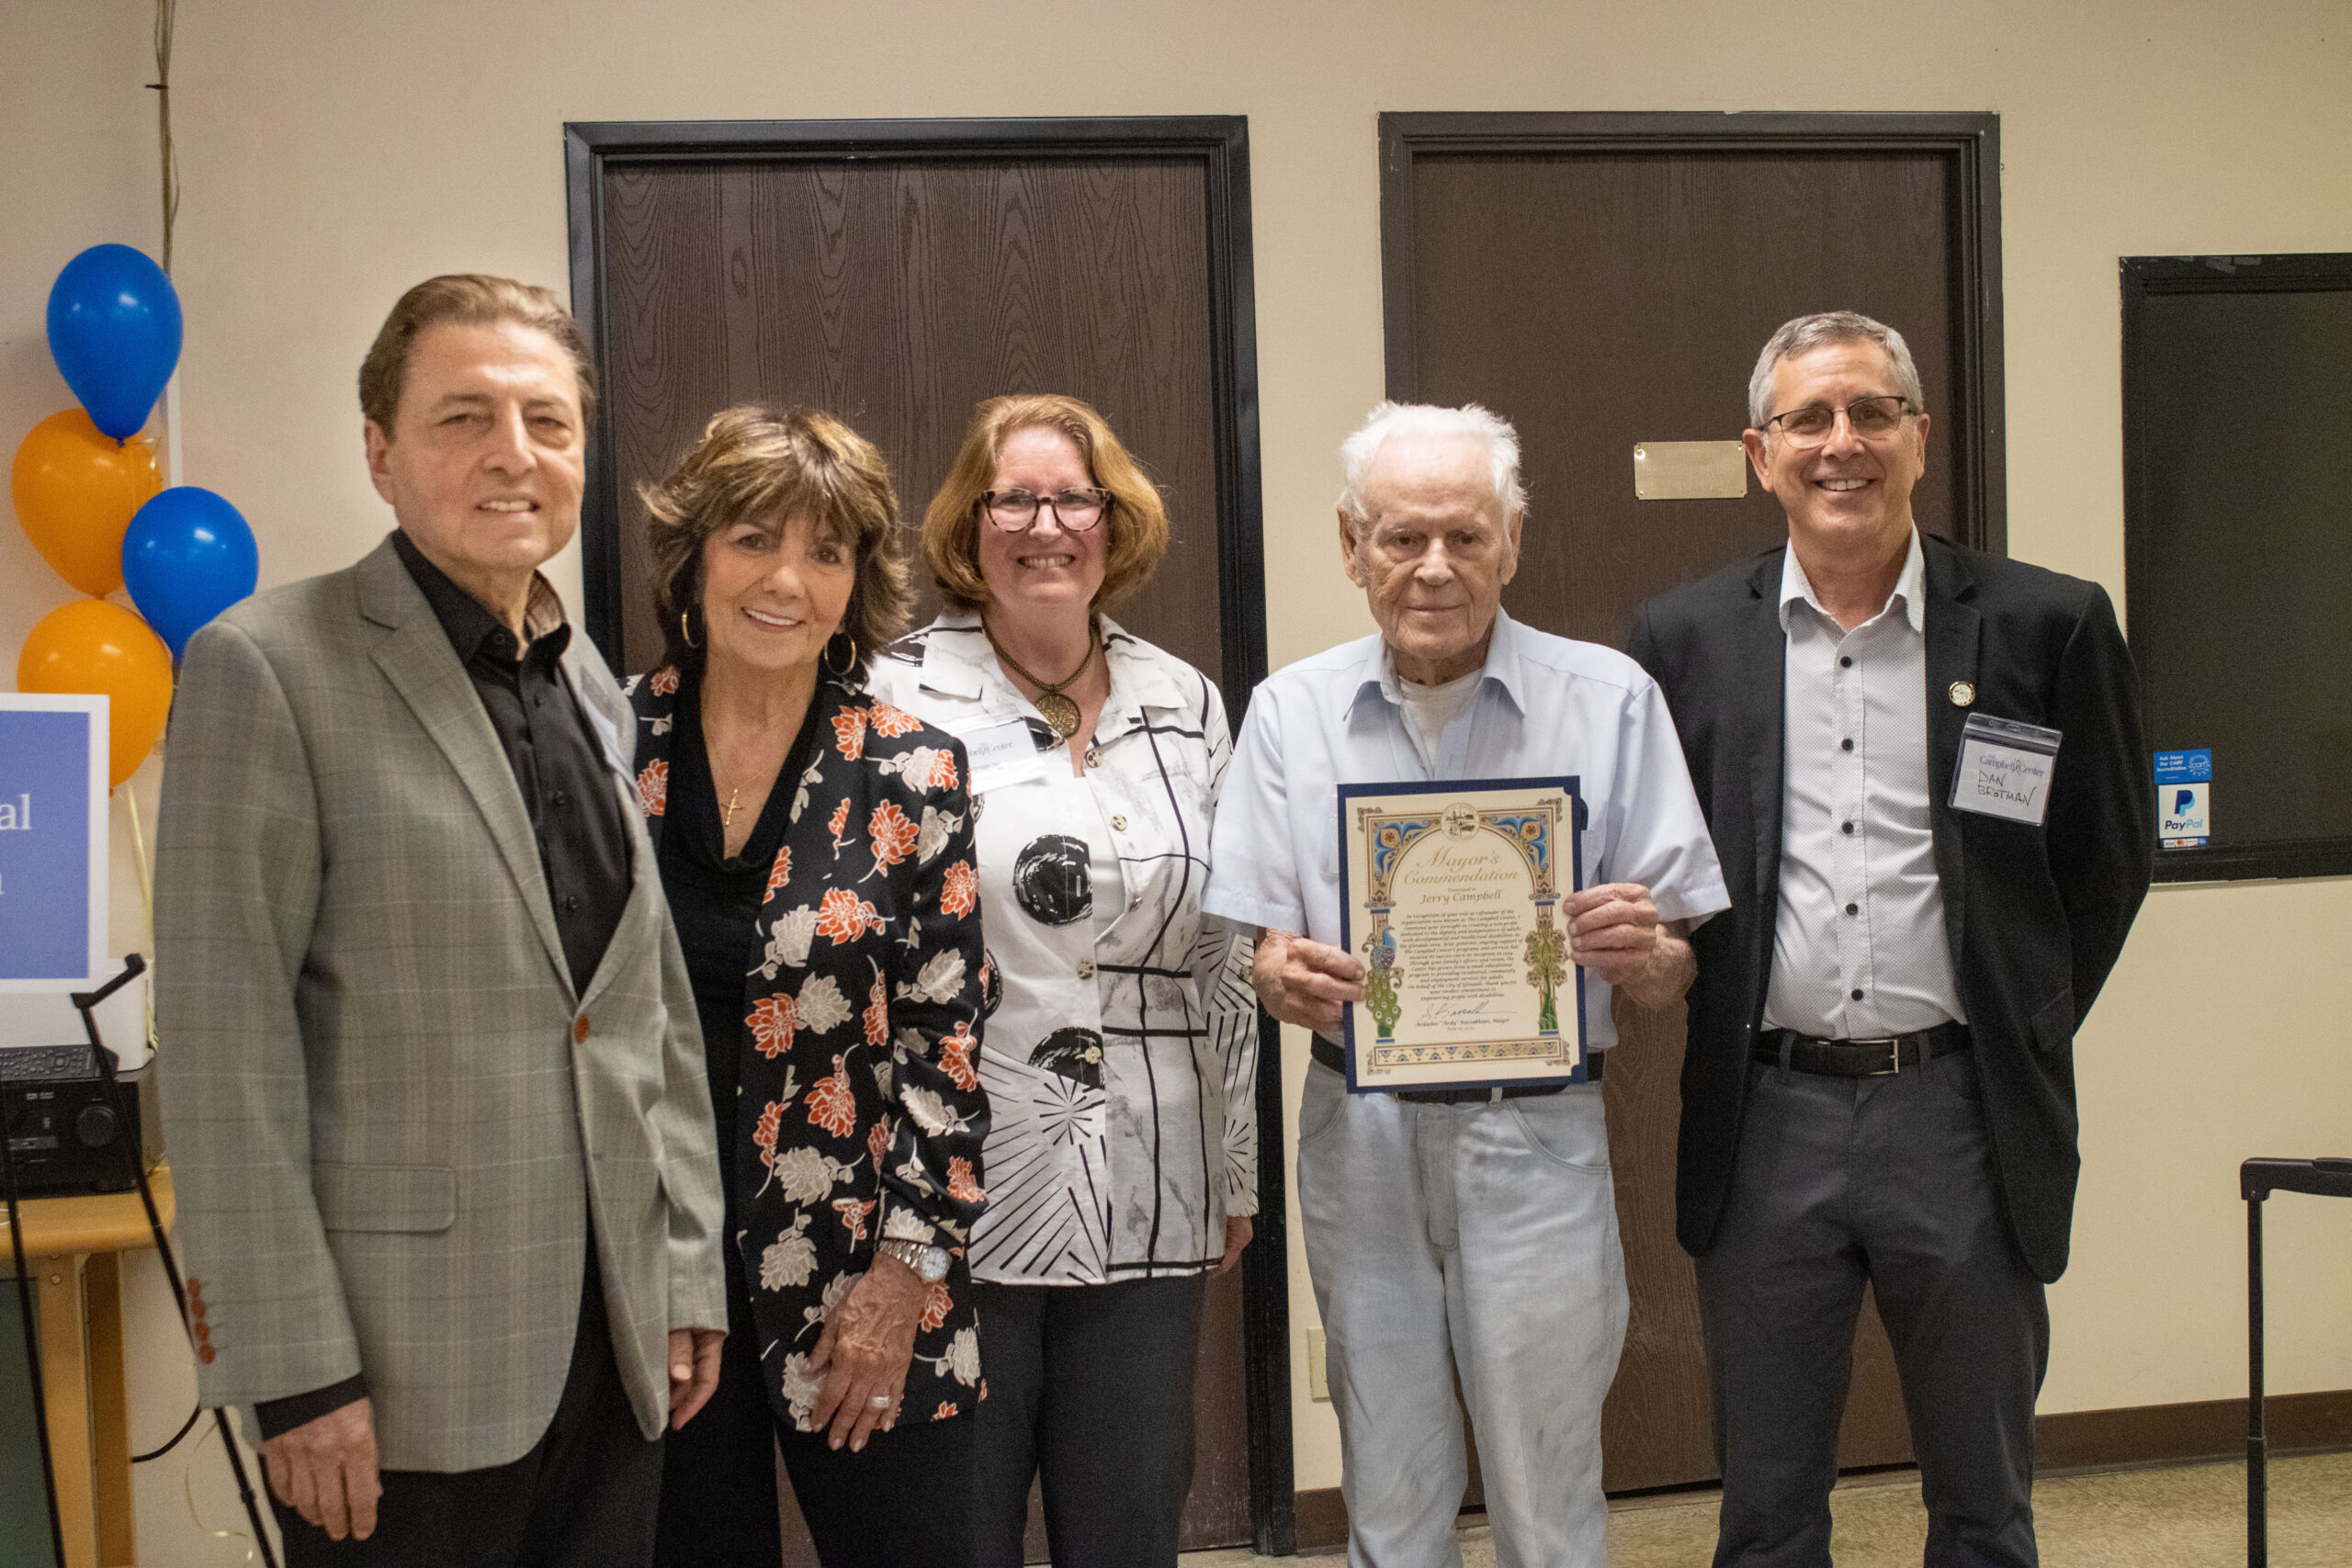 Glendale dignitaries with ED Nancy Niebrugge and Founder Jerry Campbell.